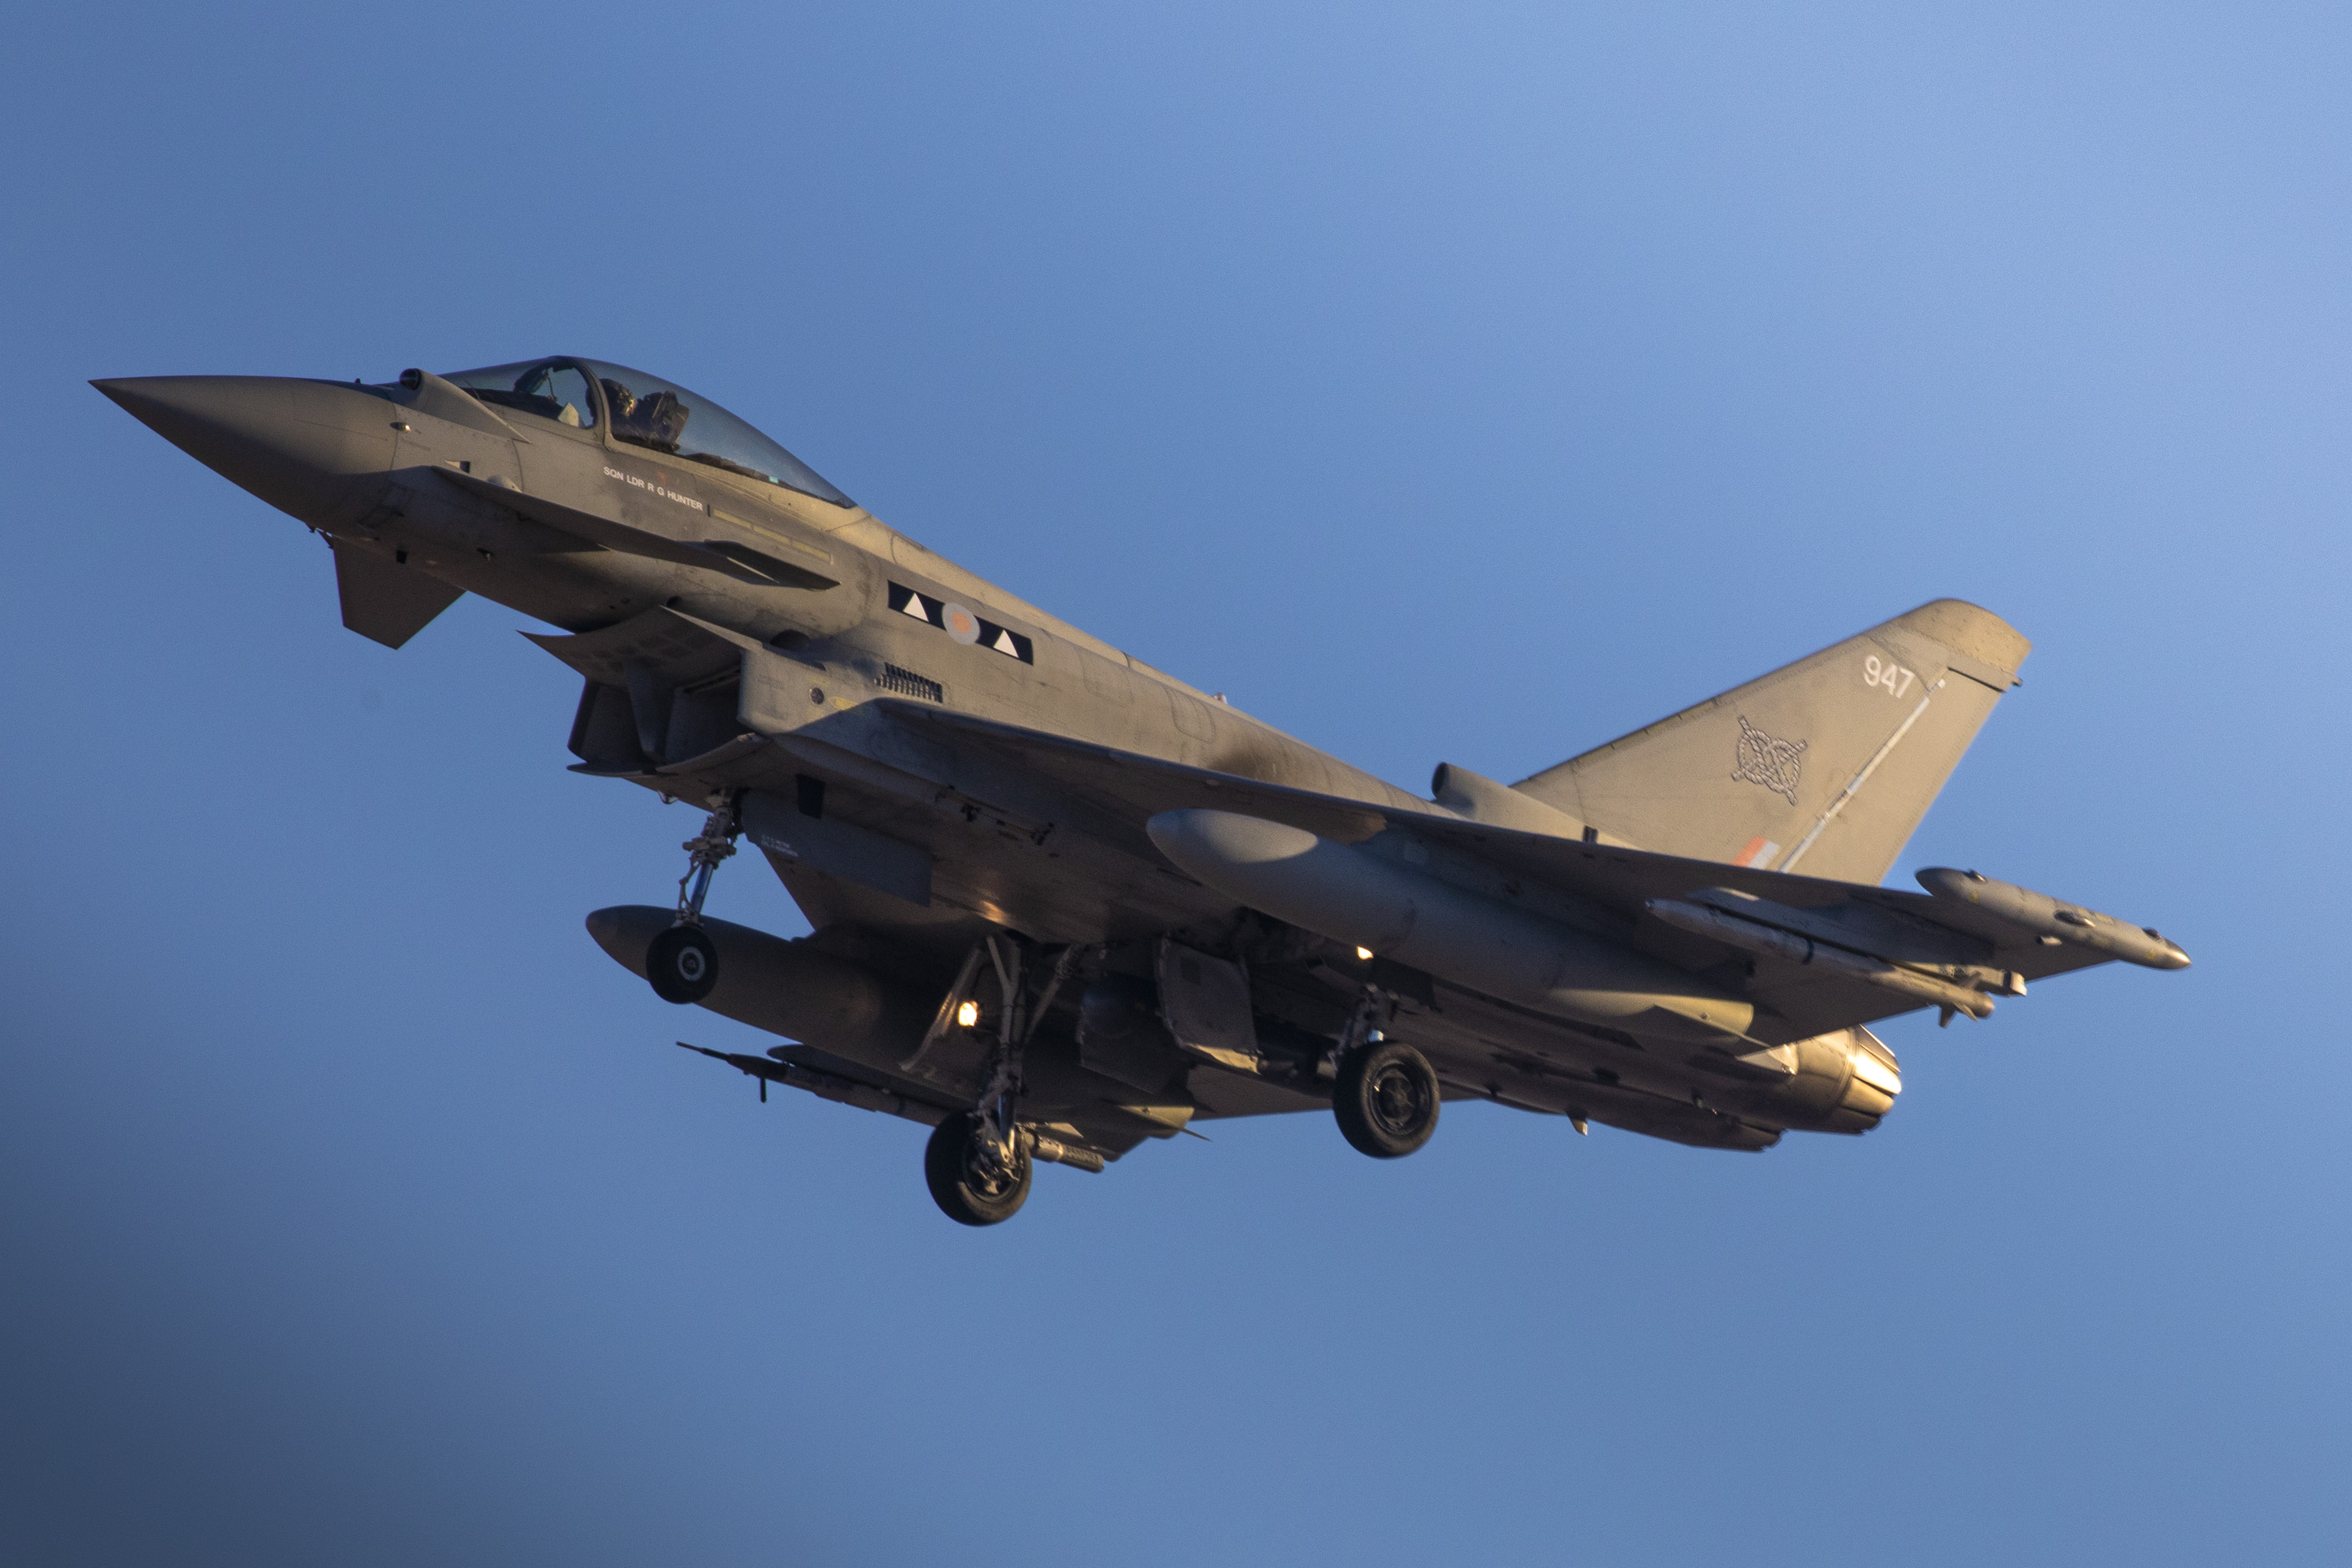 Image shows RAF Typhoon aircraft in flight.